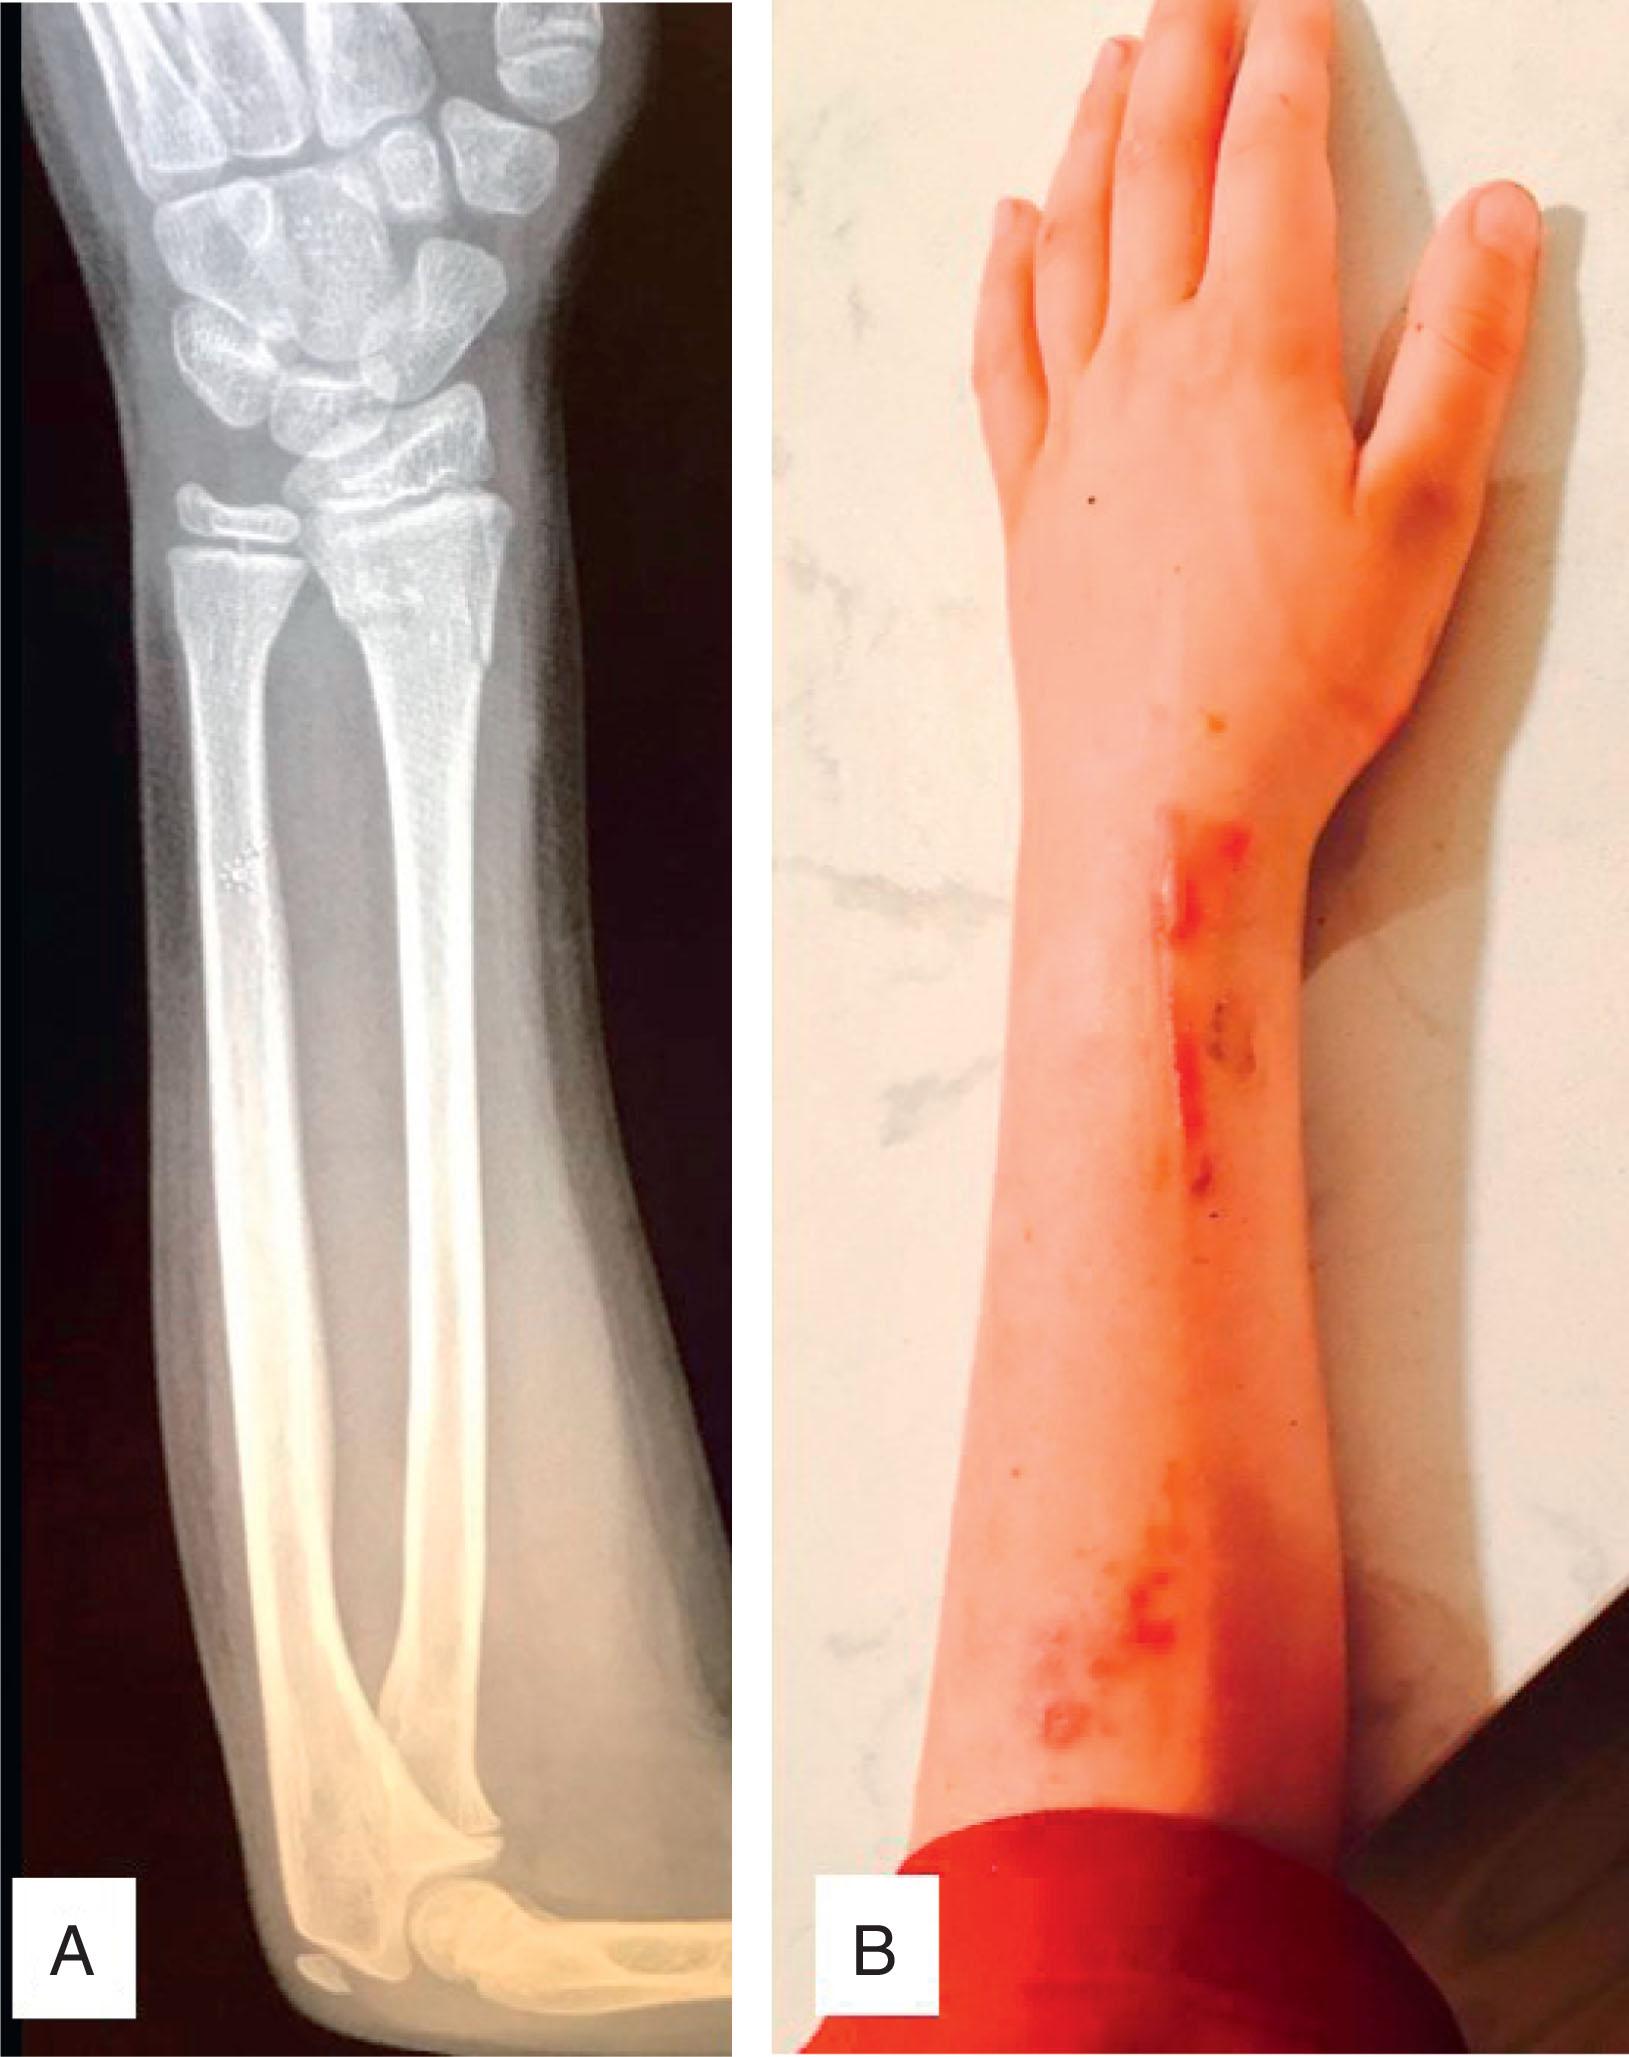 Fig. 6.6, Skin Damage From Coat Hanger Use. (A) This adolescent’s undisplaced distal radius fracture was treated with a below-elbow cotton-padded cast. (B) Self-inflicted skin damage done via repeated use of coat hanger.